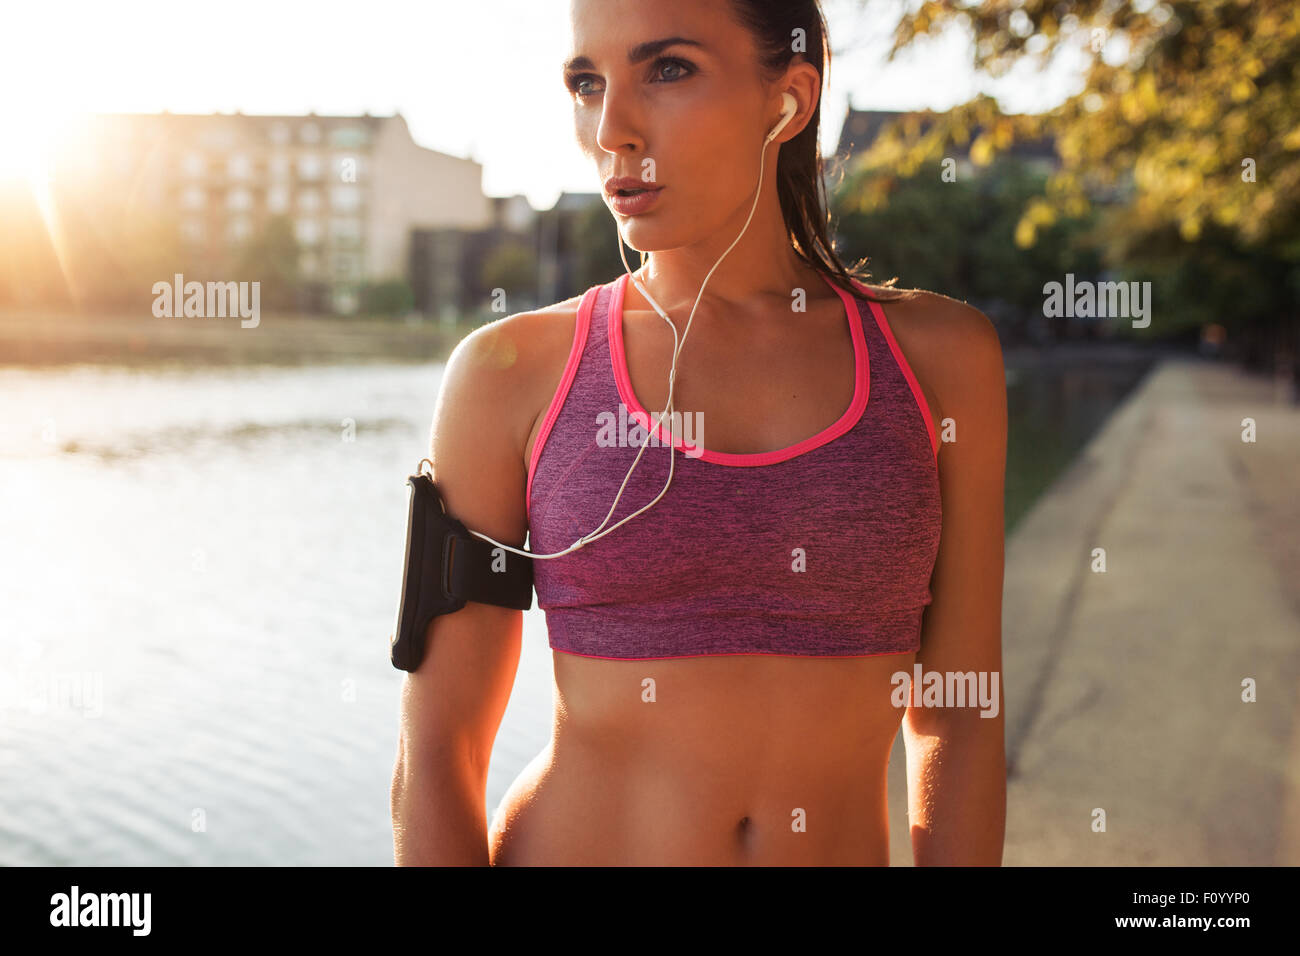 Young woman runner wearing armband and listening to music on earphones. Fit sportswoman taking a break from outdoors training. Stock Photo